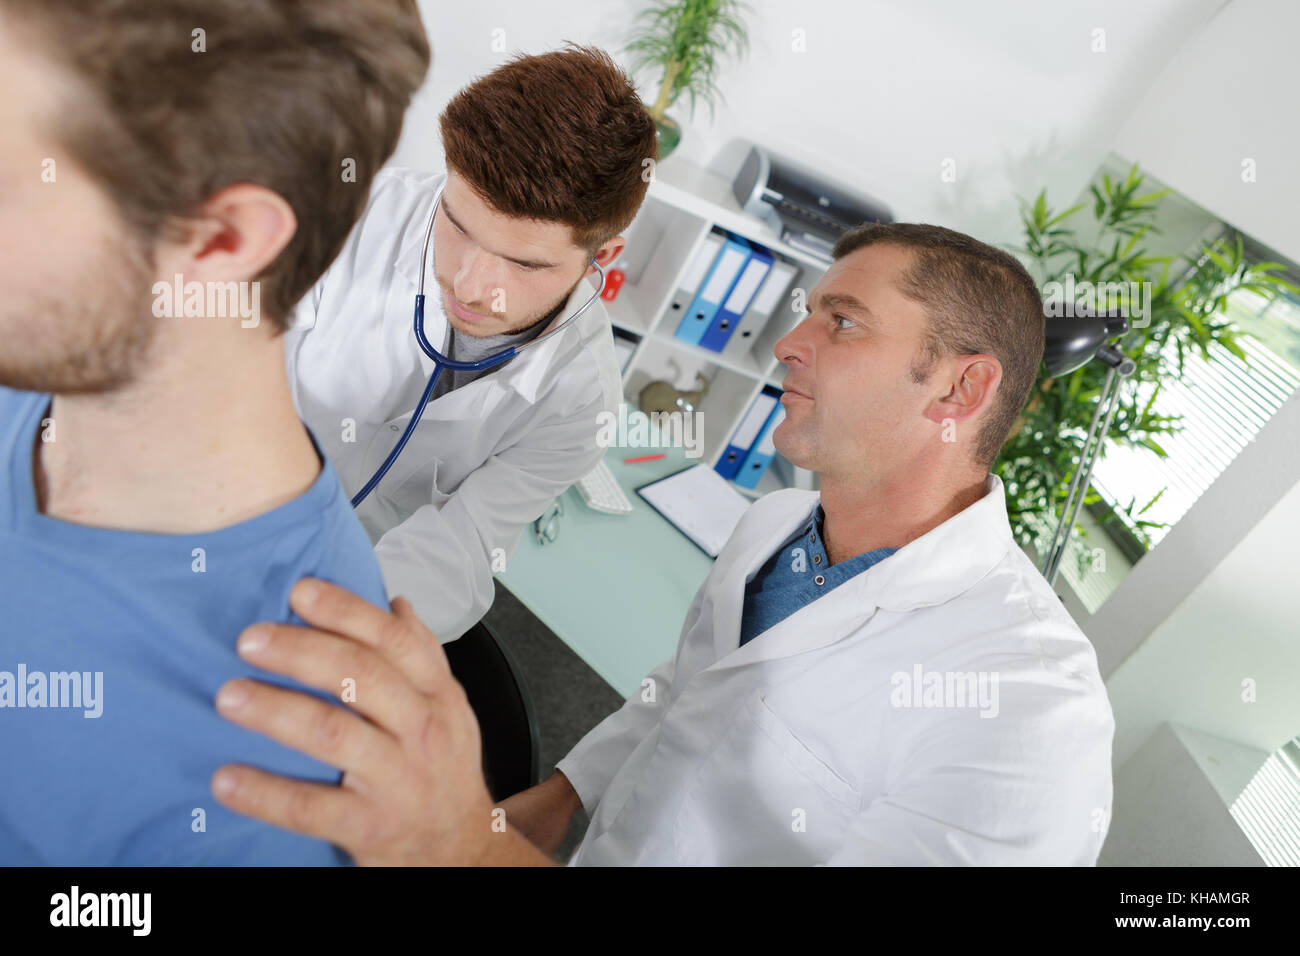 internist doctor learning on the job Stock Photo